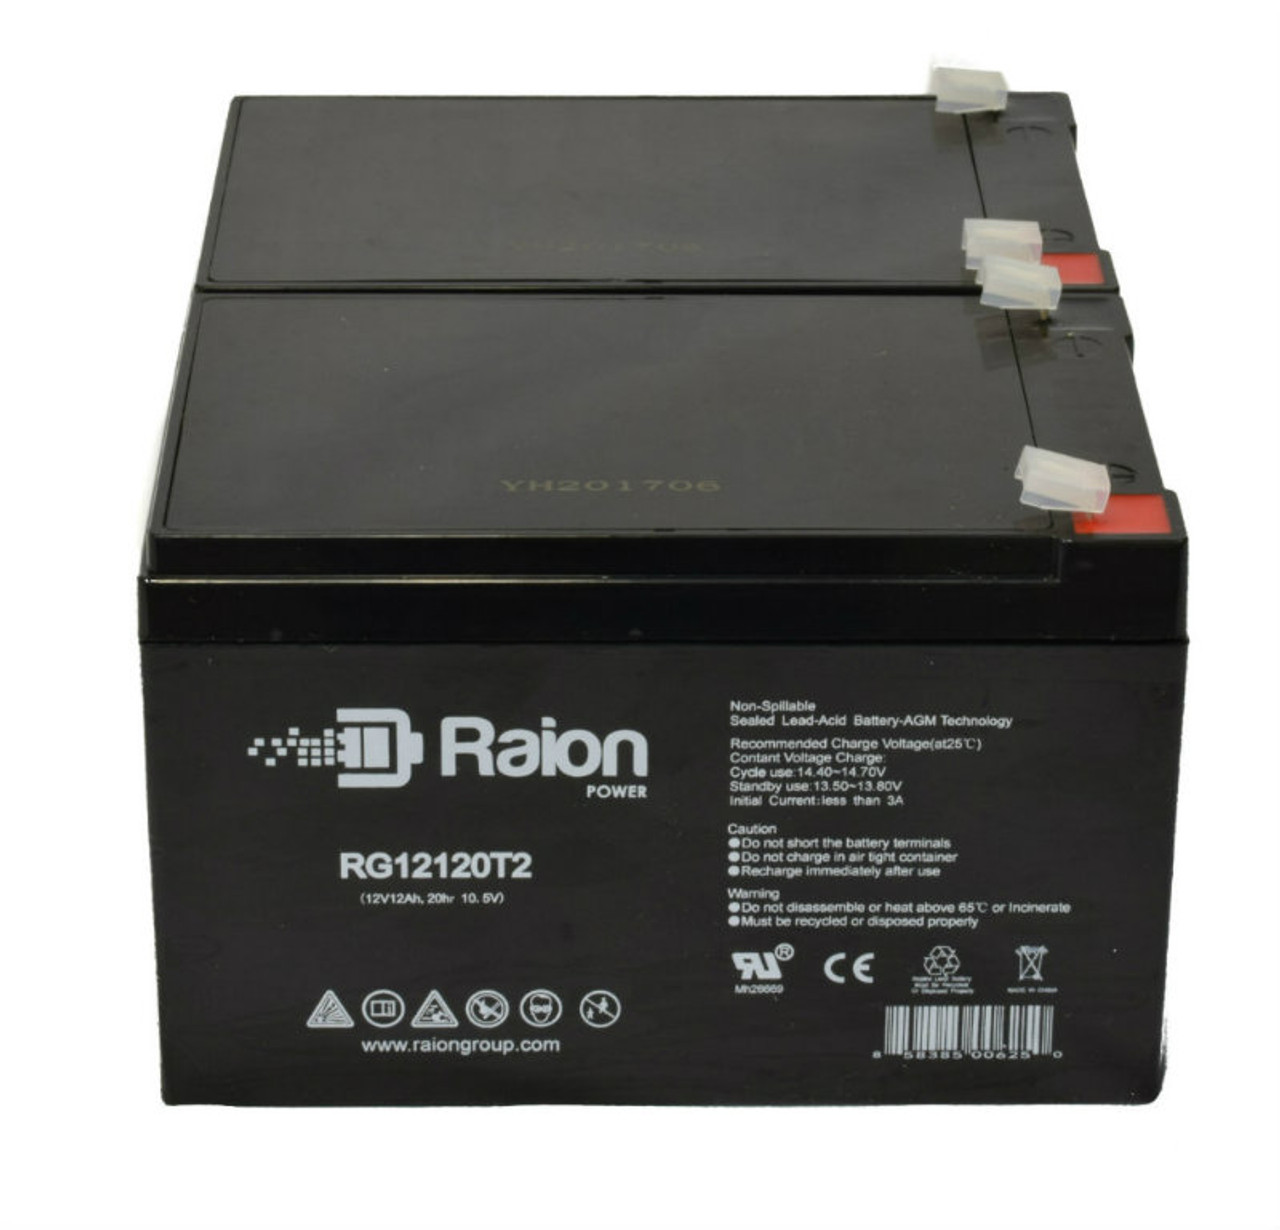 Raion Power 12V 12Ah Non-Spillable Compatible Replacement Battery for Palma PM10A-12 - (2 Pack)